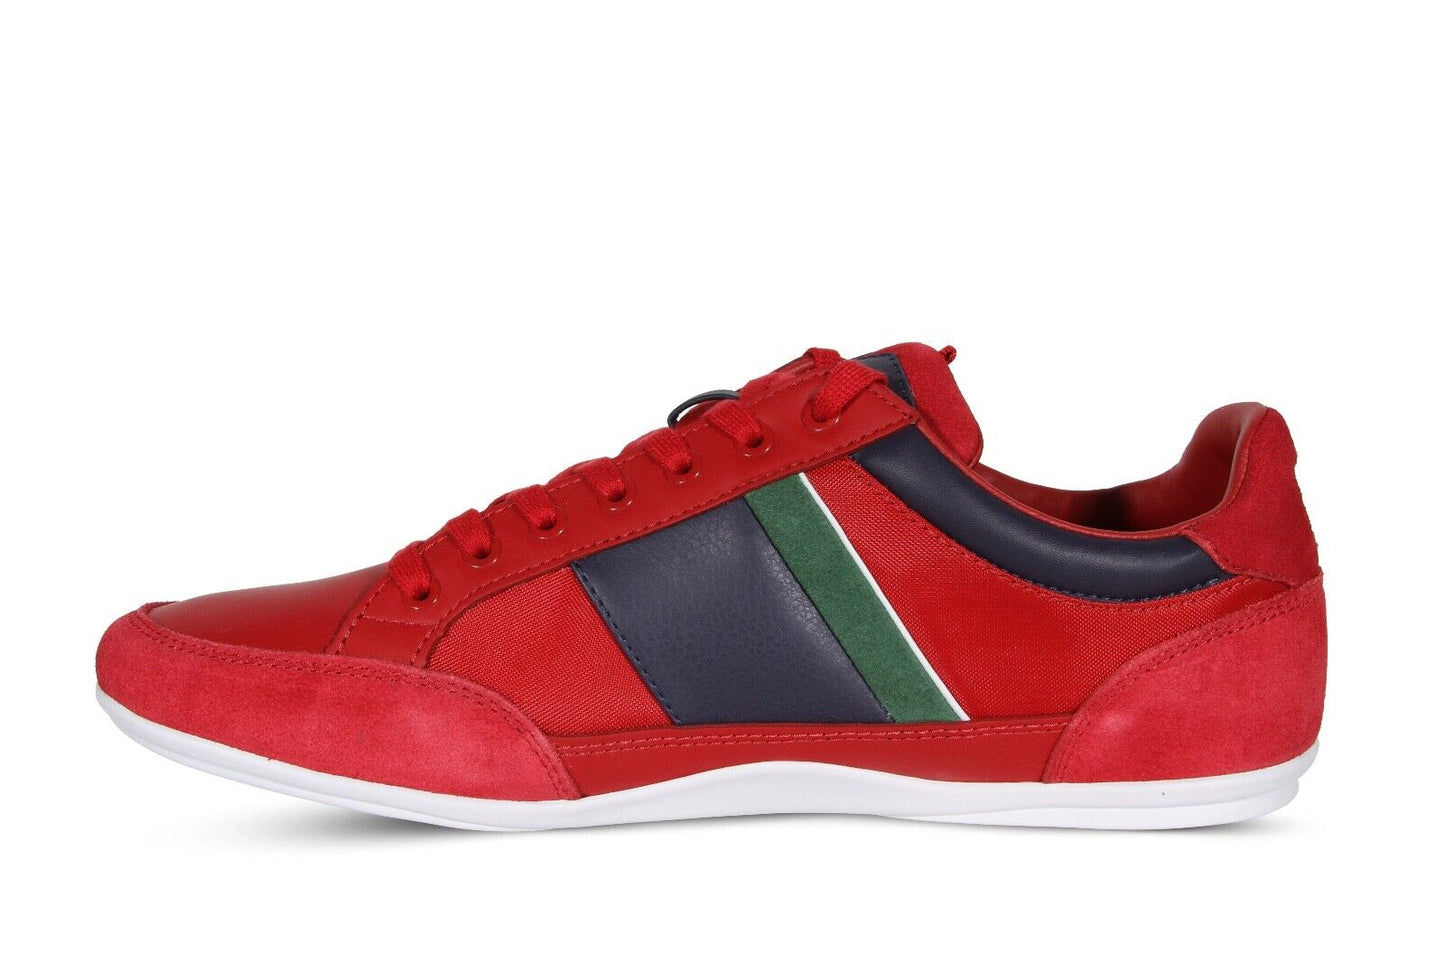 Lacoste Chaymon 123 1 CMA Men’s Sneakers in Red and Navy Blue 745CMA0017RS7